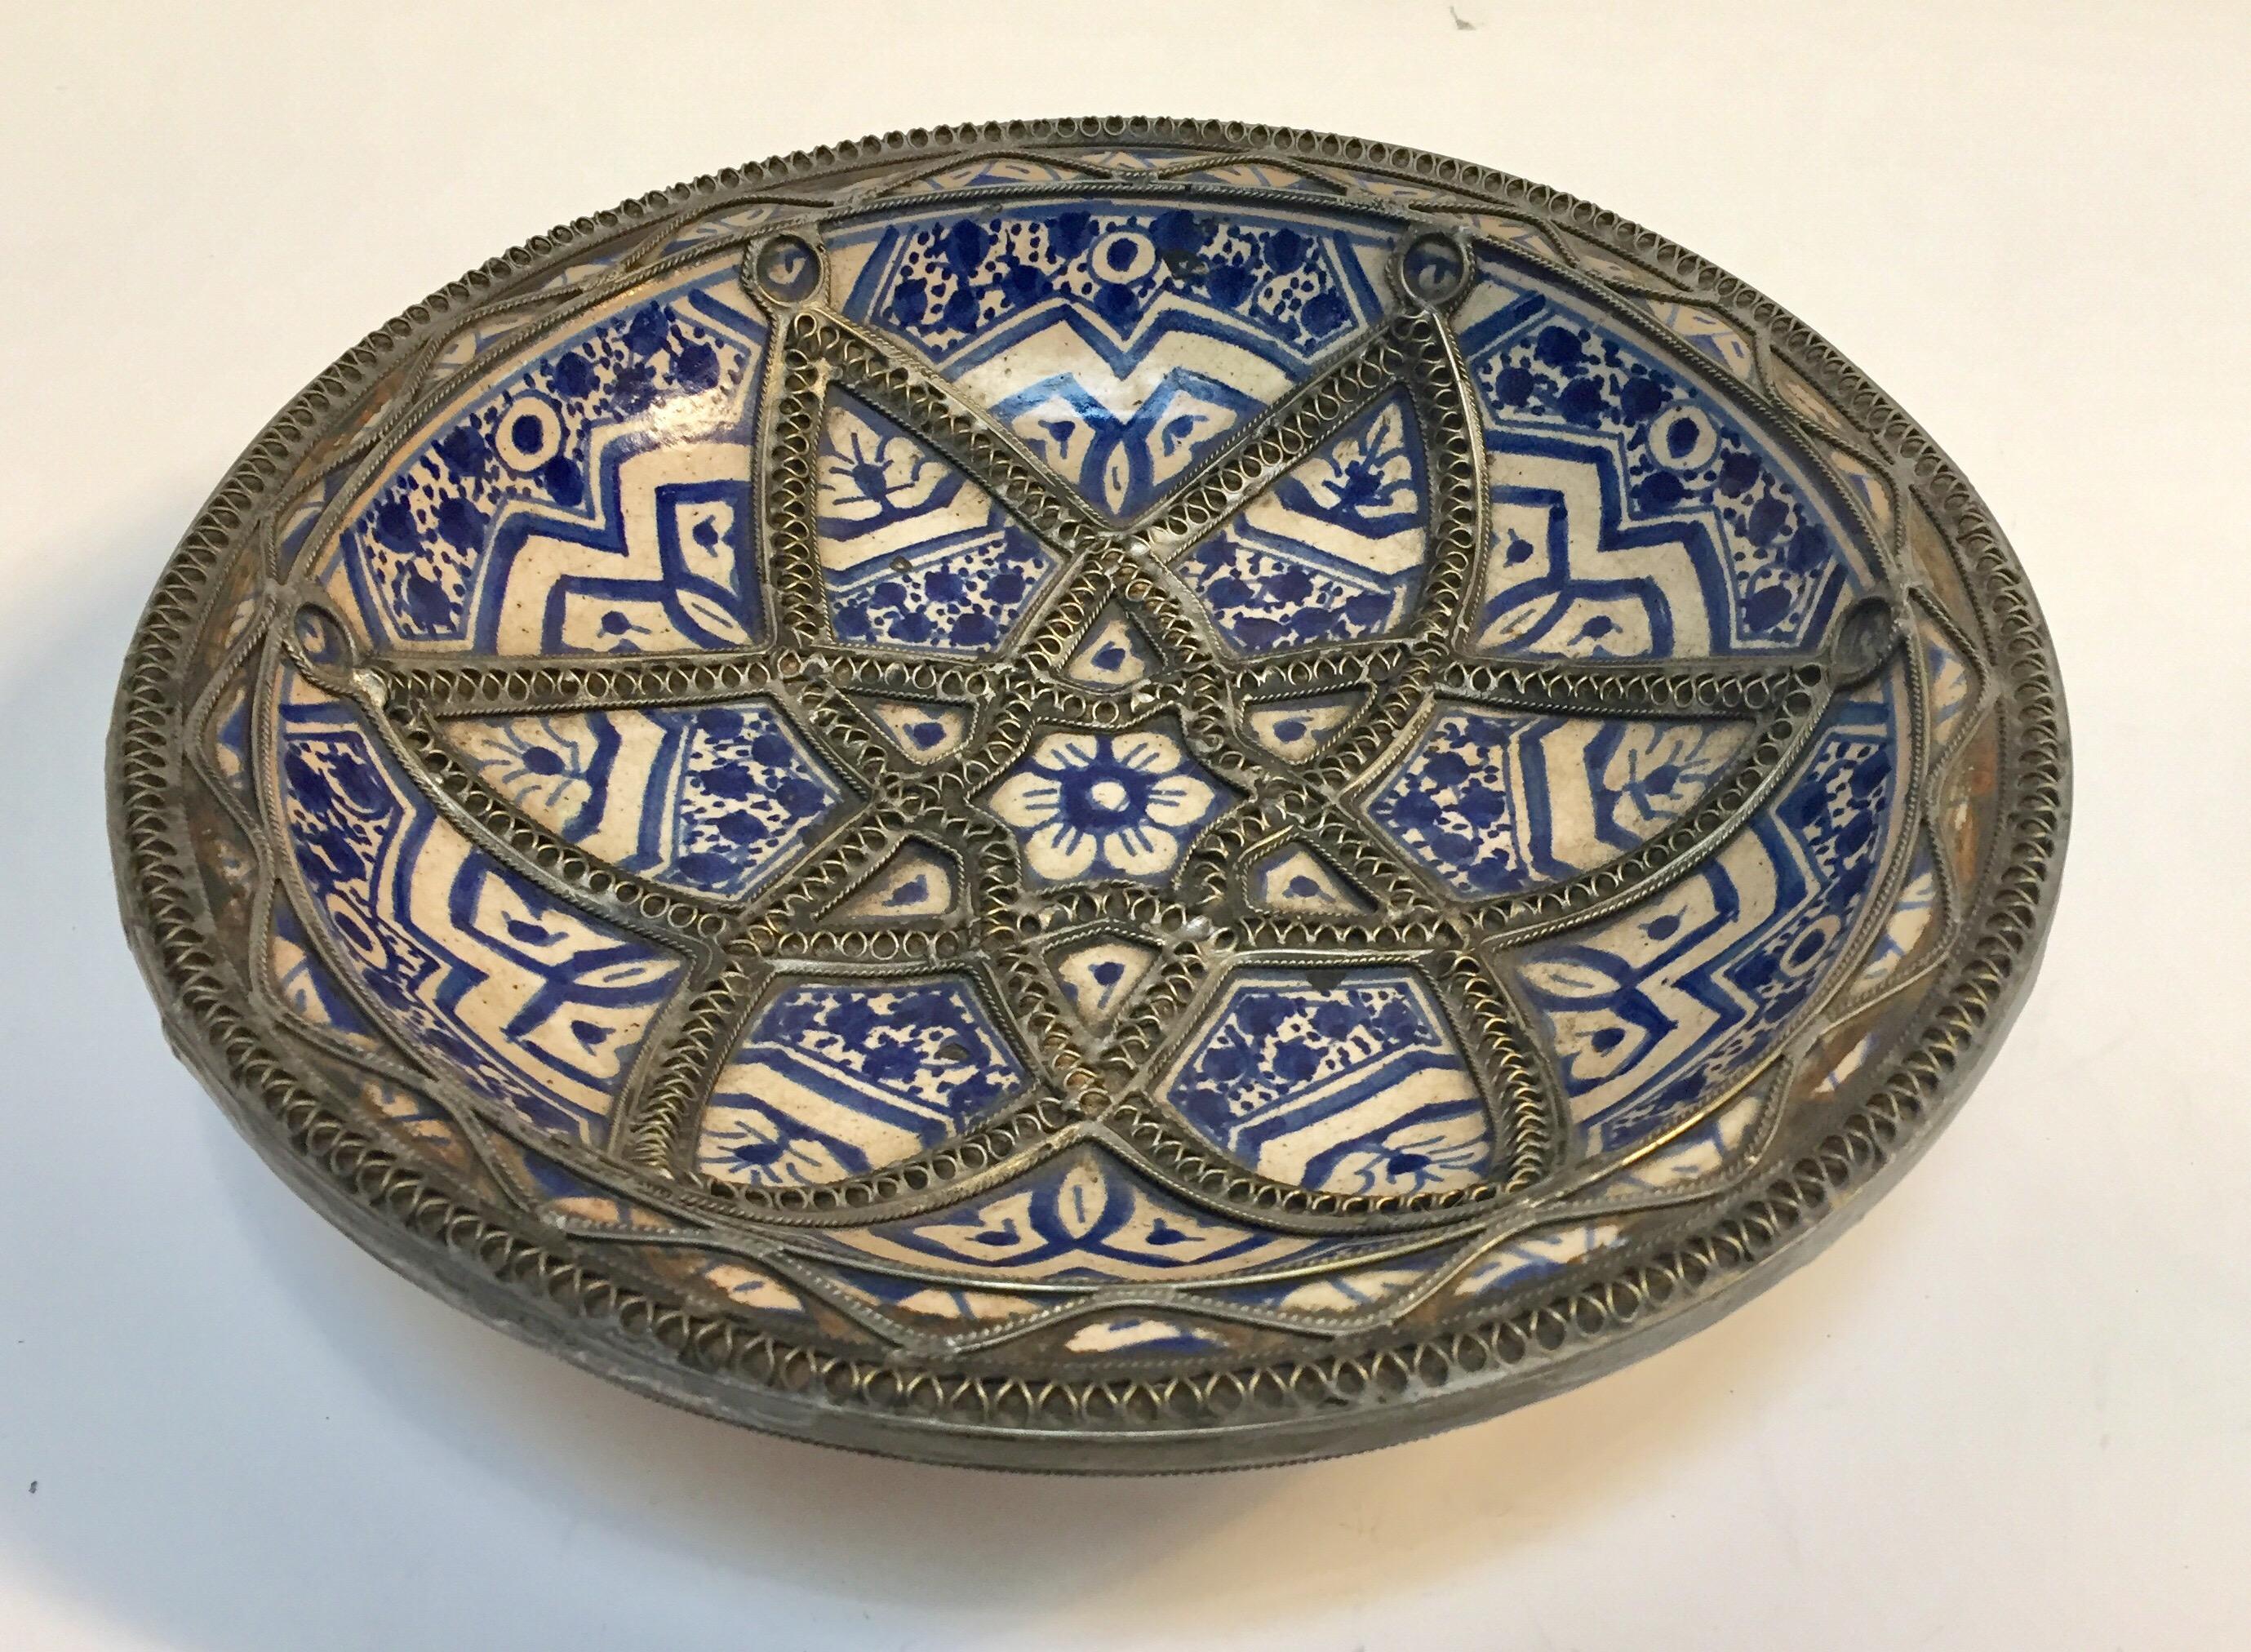 Moroccan Decorative Moorish Blue and White Handcrafted Ceramic Bowl from Fez